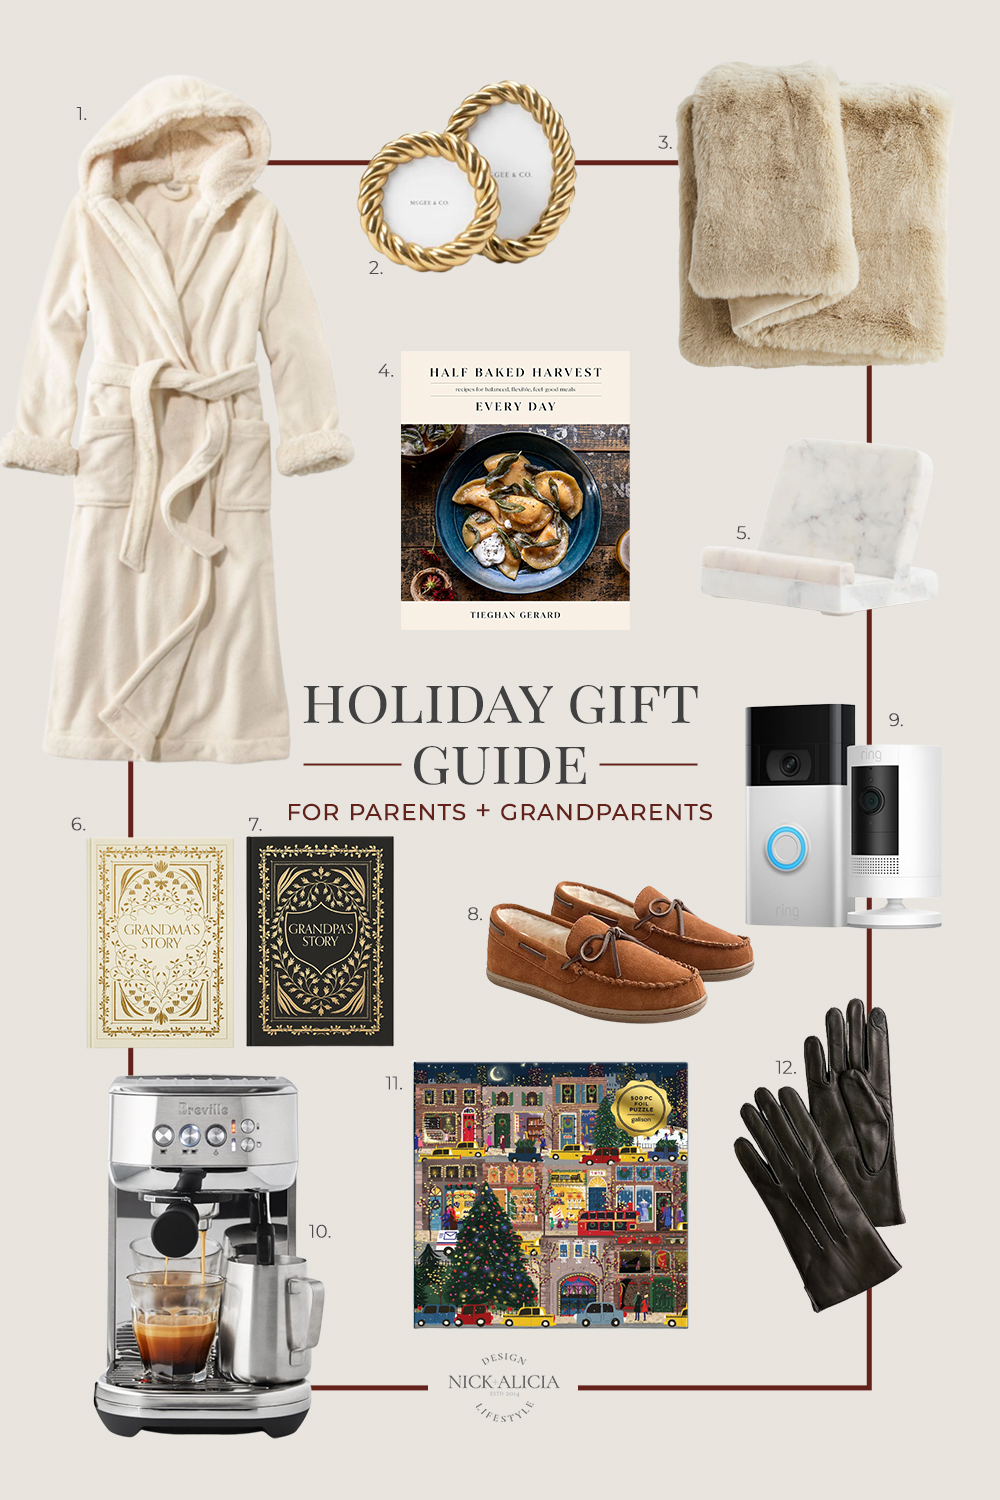 Gift Ideas for Grandparents Who Have Everything